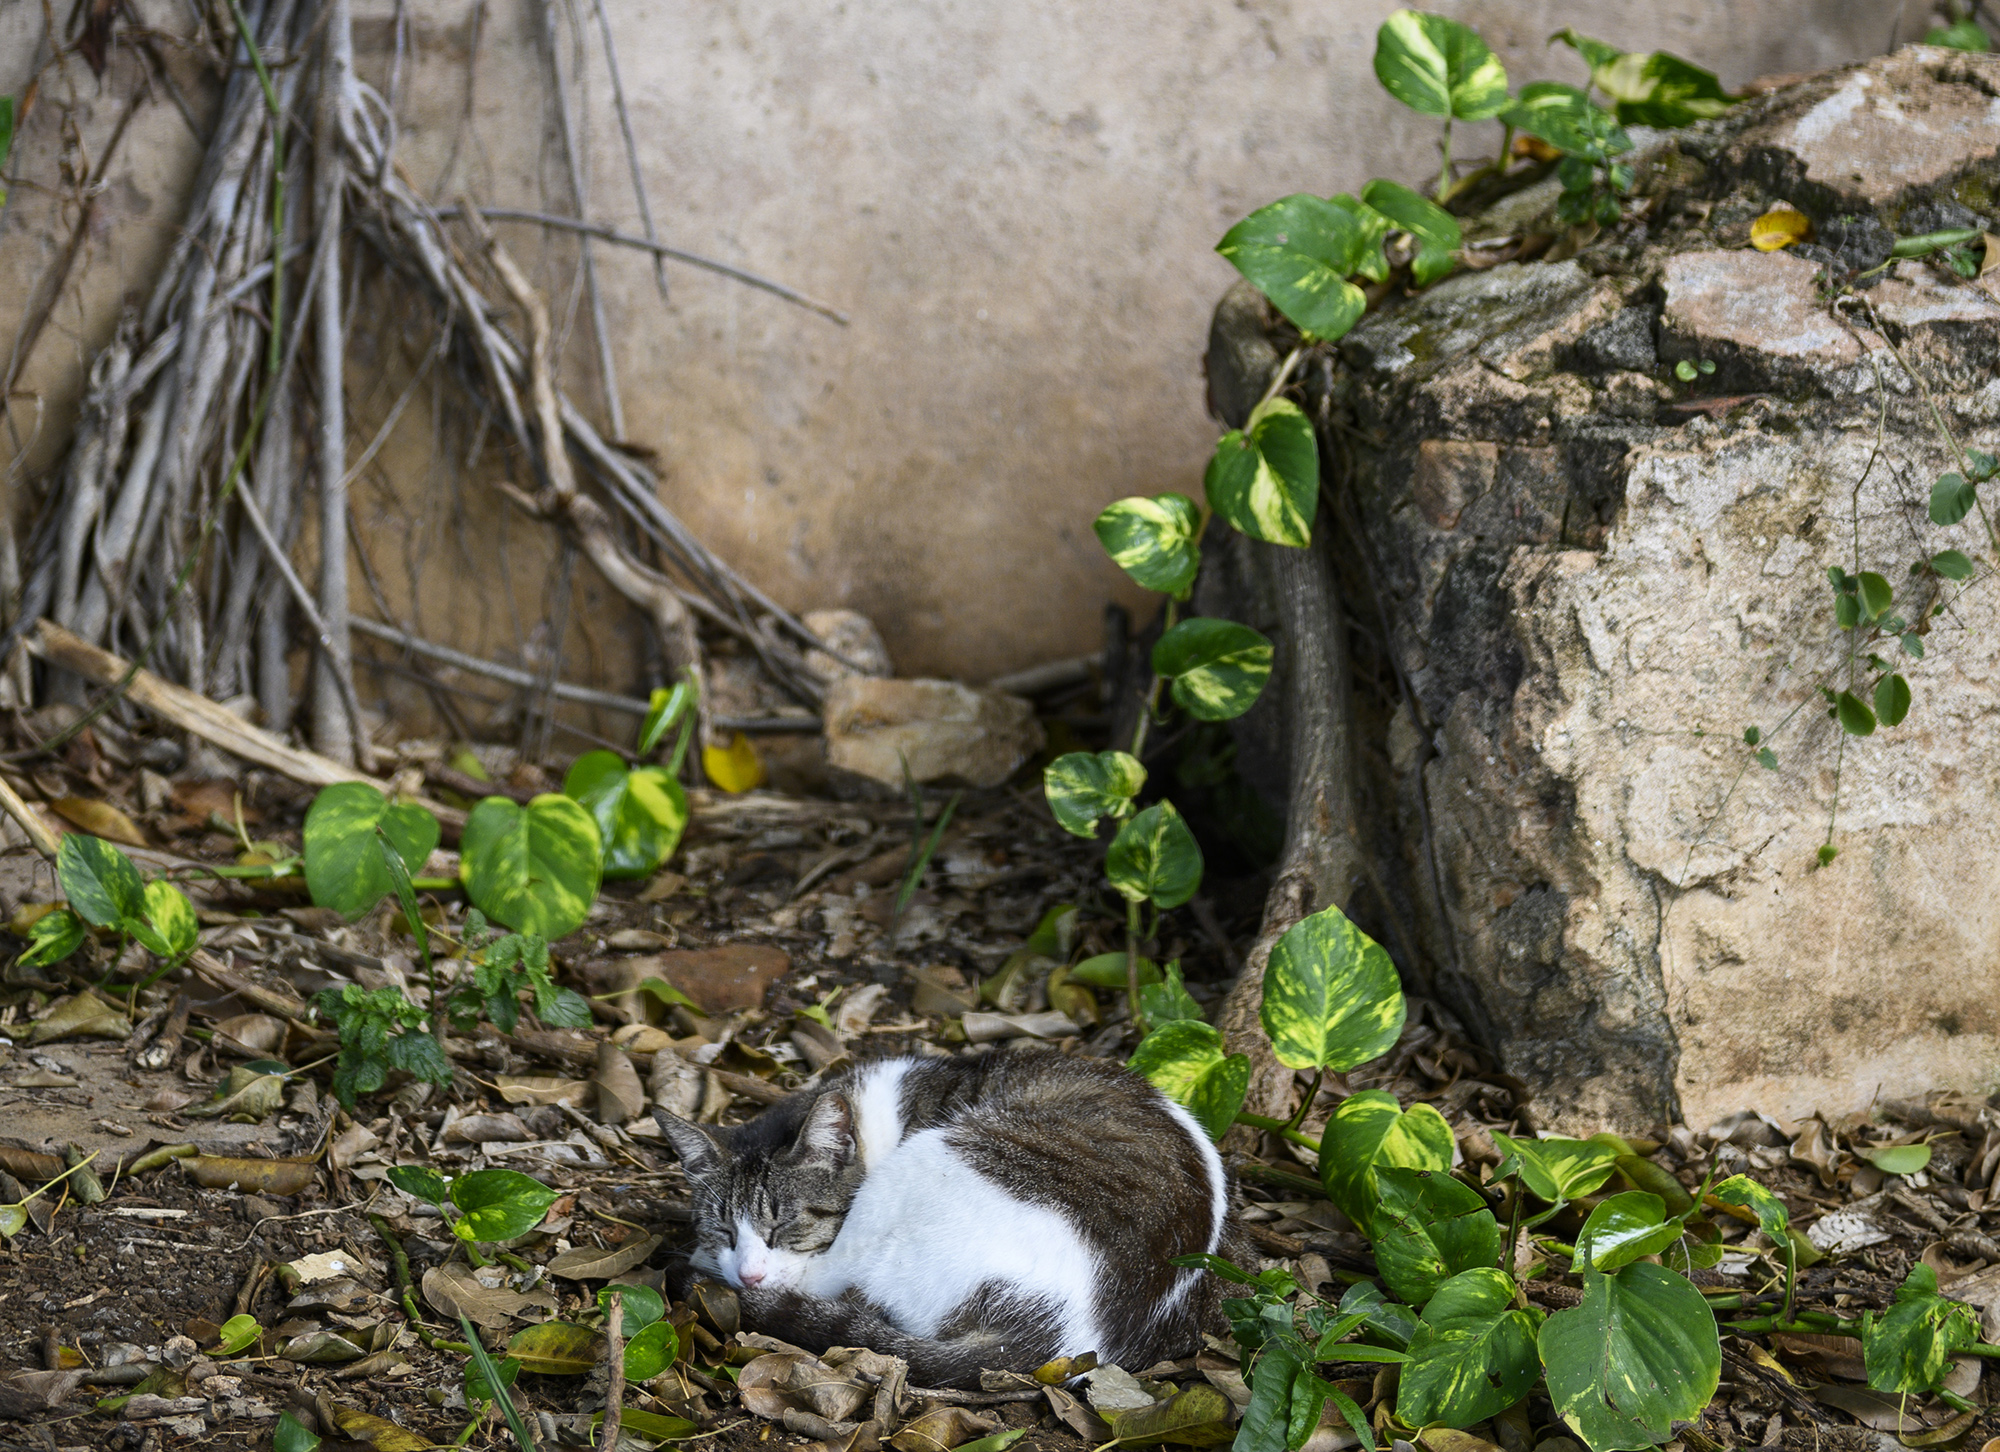 A cat comfortably curled up in some foliage by a wall.